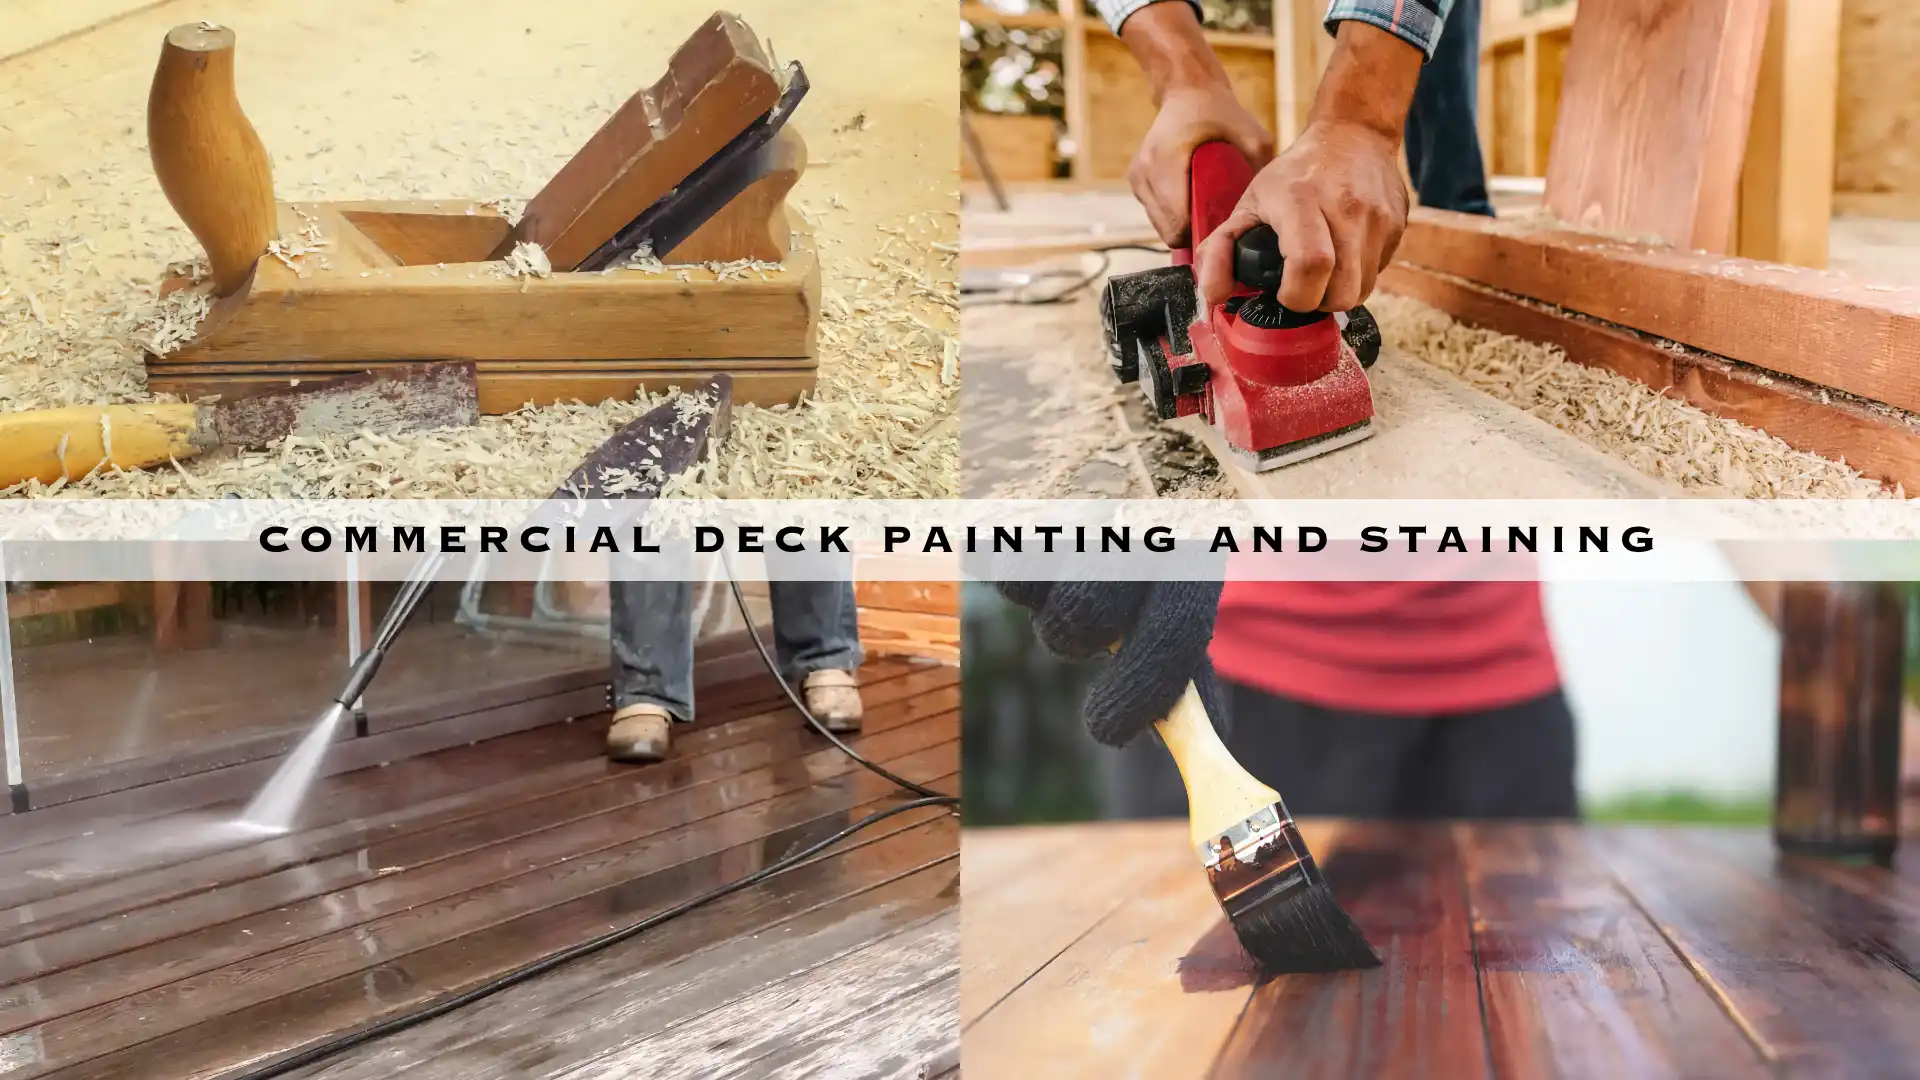 COMMERCIAL BUILDING DECK PAINTING AND STAINING - HERO DESKTOP